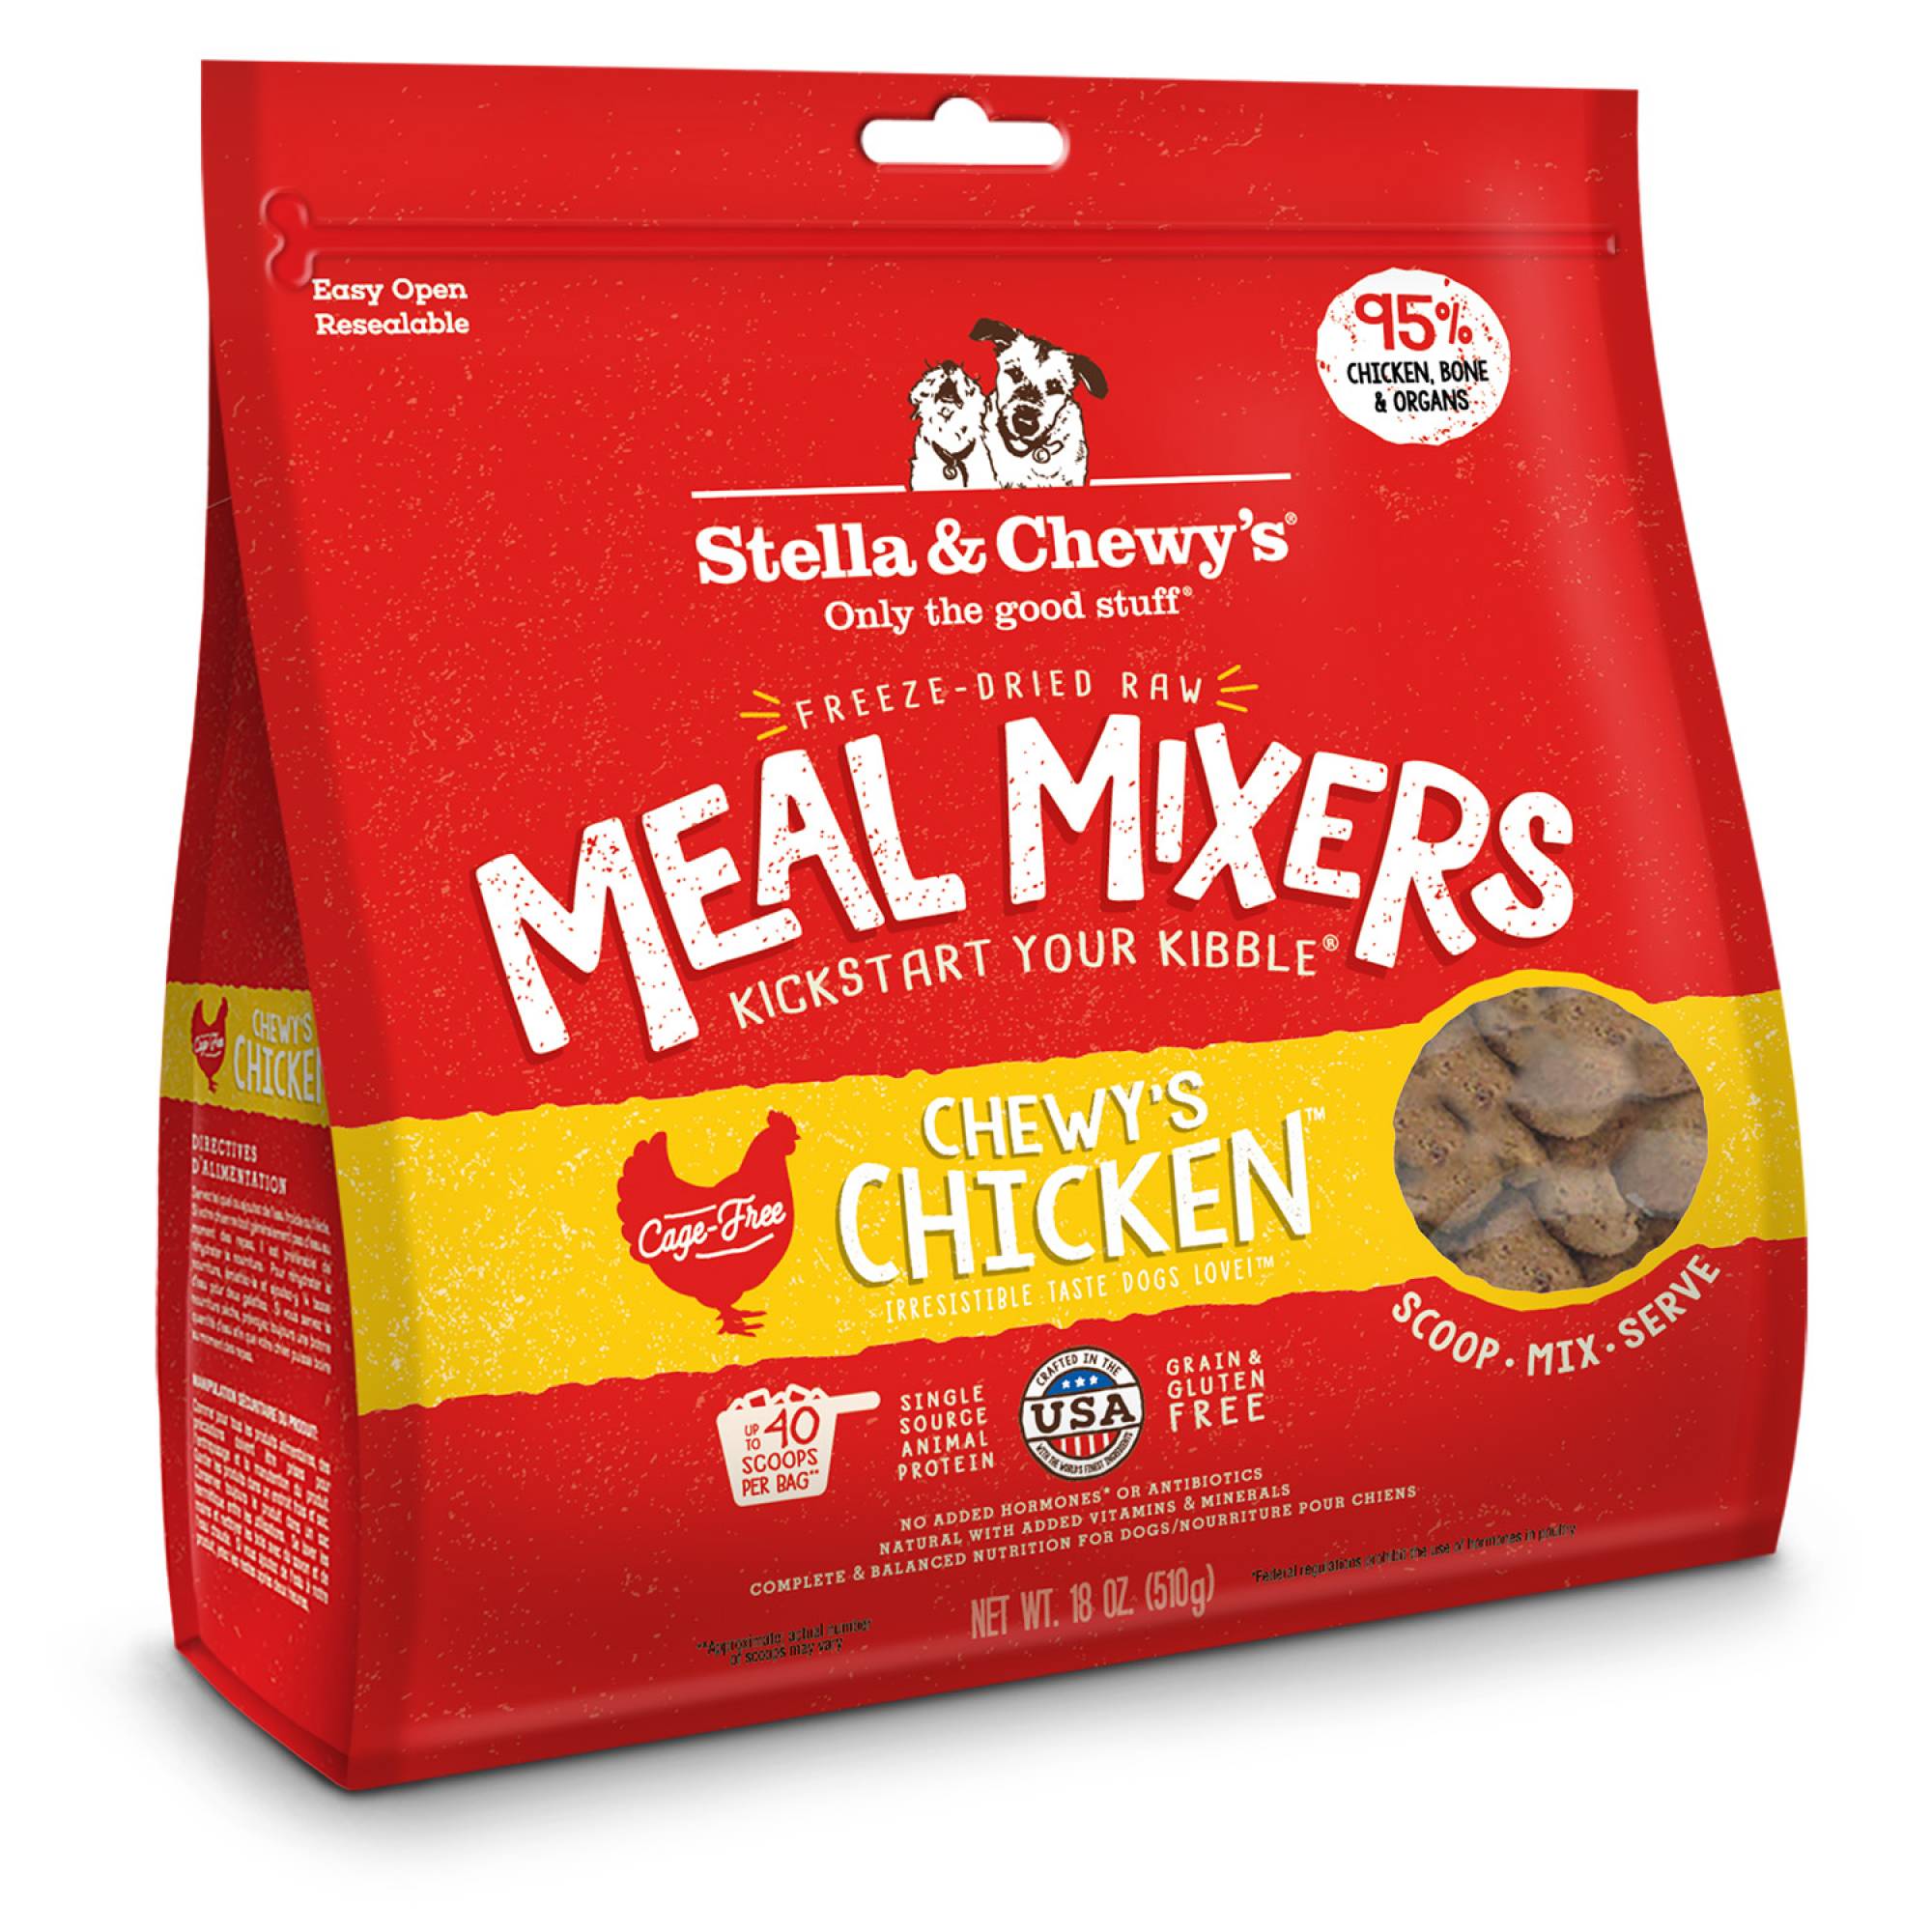 Stella & Chewy's - Dog Freeze-Dried Meal Mixers - Chewy's Chicken 18oz (510g)